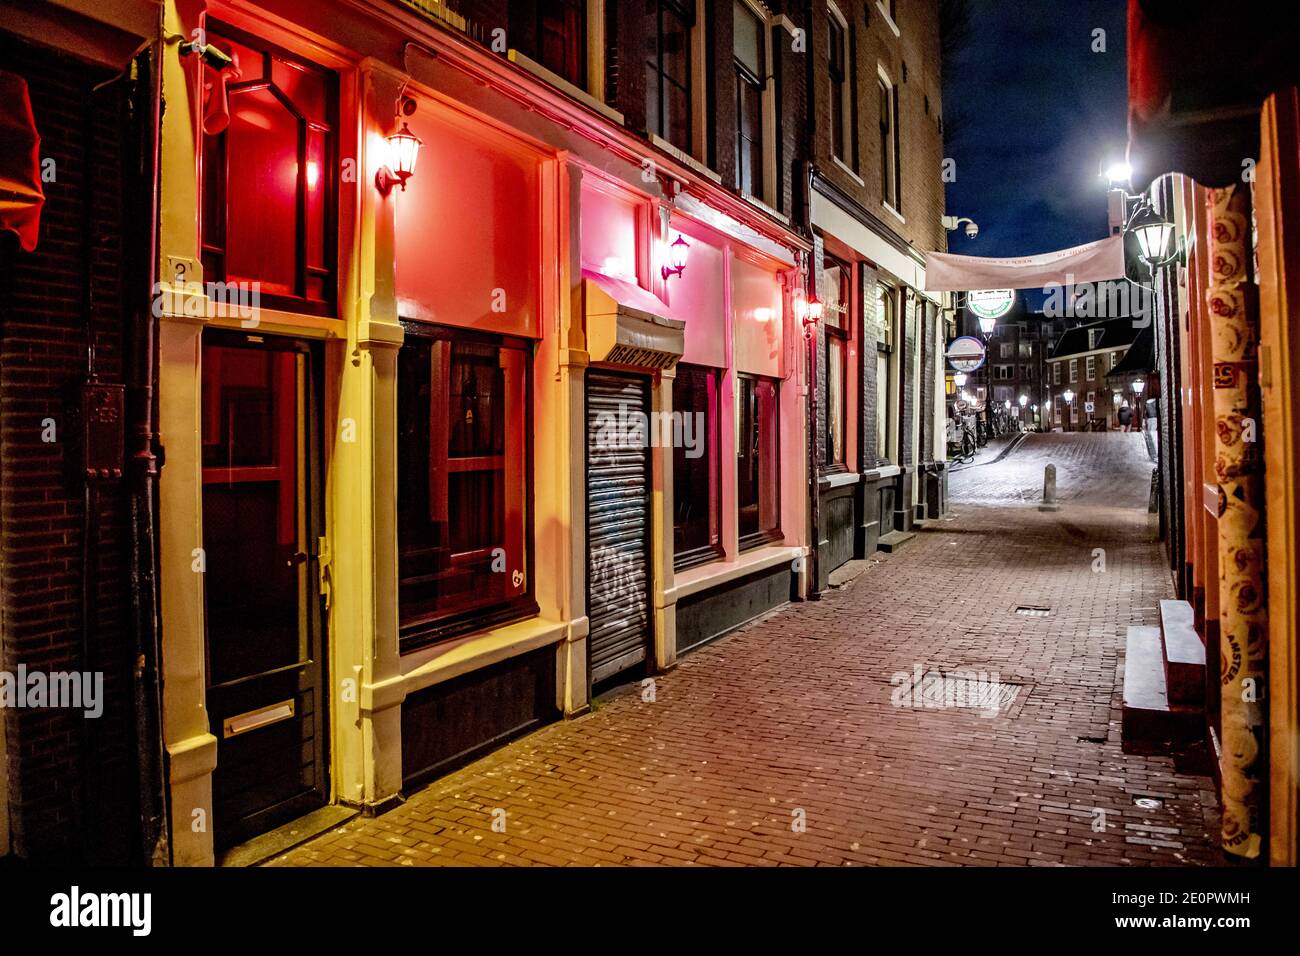 Amsterdam, Netherlands. 02nd Jan, 2021. Empty red light district in  Amsterdam, the Netherlands, on January 01, 2020, during the Covid-19  lockdown. The streets are quiet due to the new corona rules and